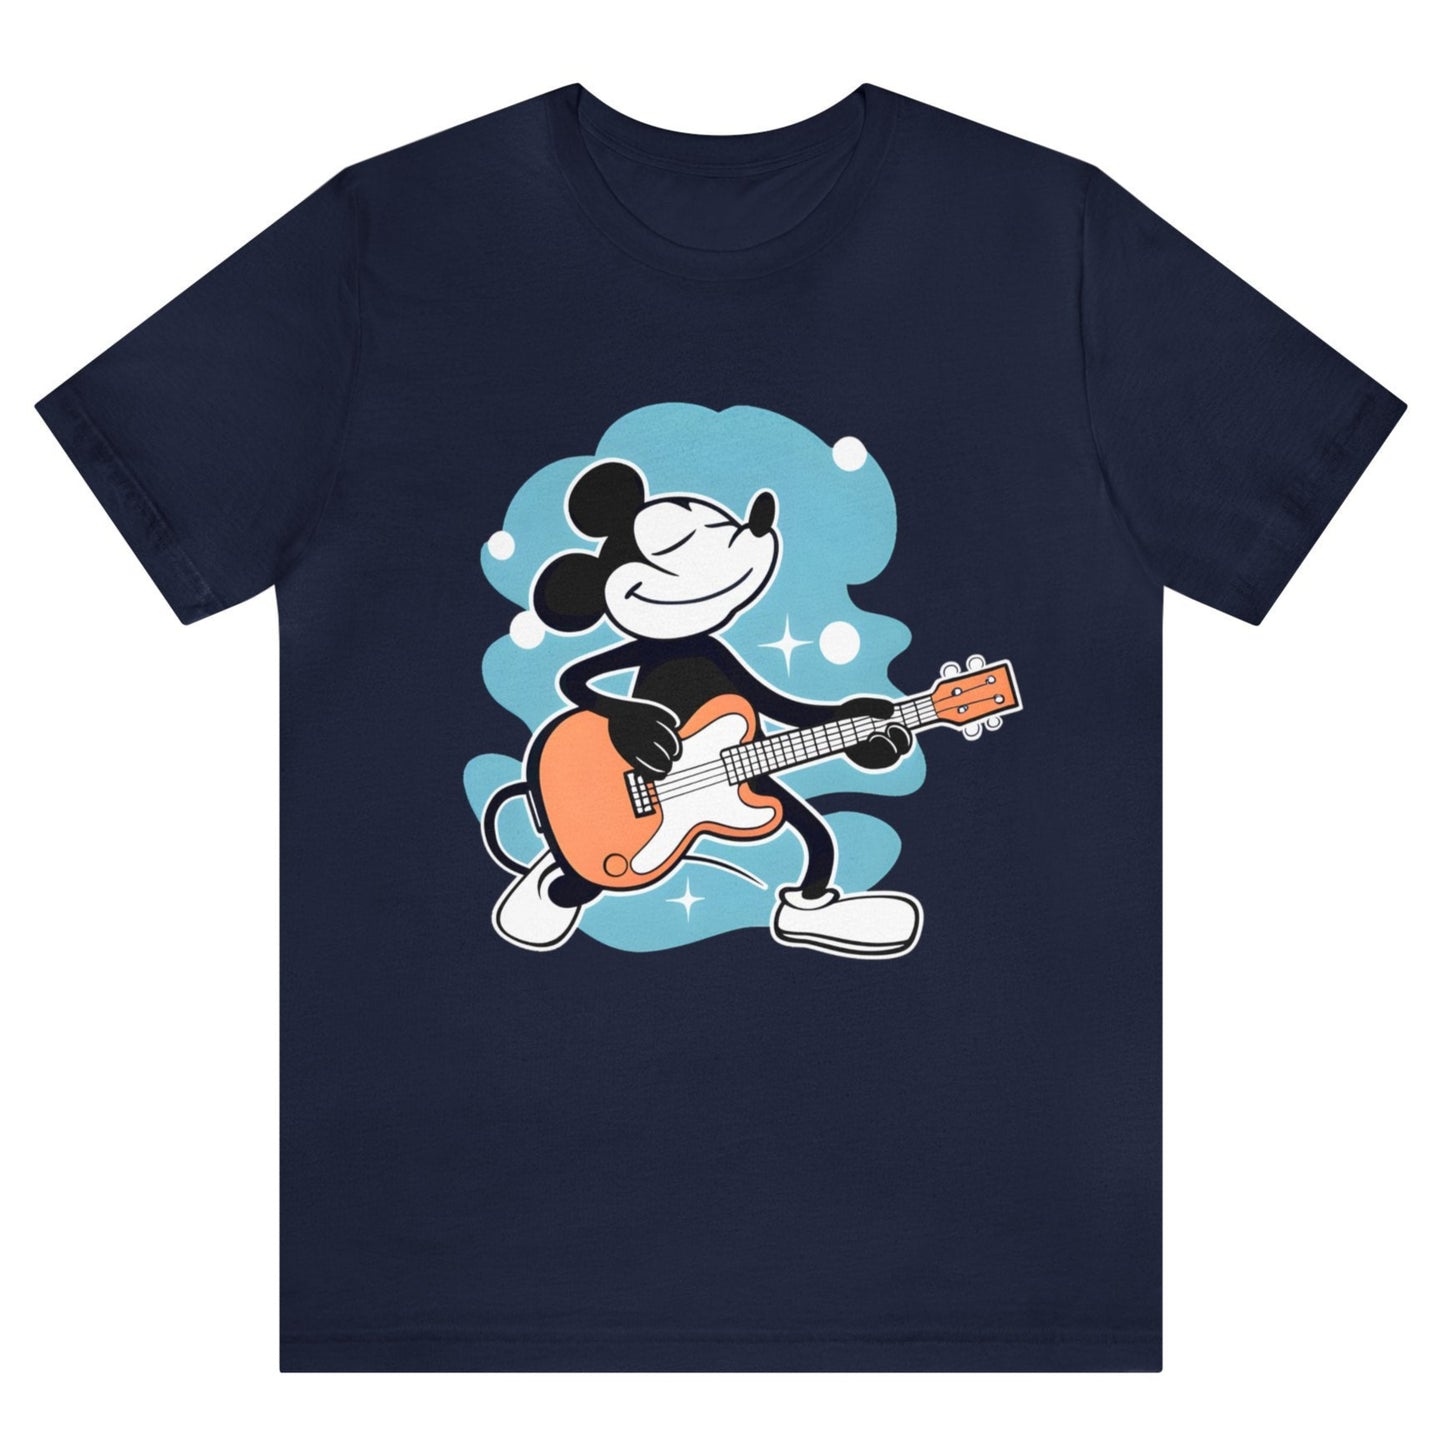 MOUSE Plays Guitar, Gift for Music or Cartoon Fan, Guitar or Bass Player, Animation Fan on Unisex Bella+Canvas Tee, Dark Colors